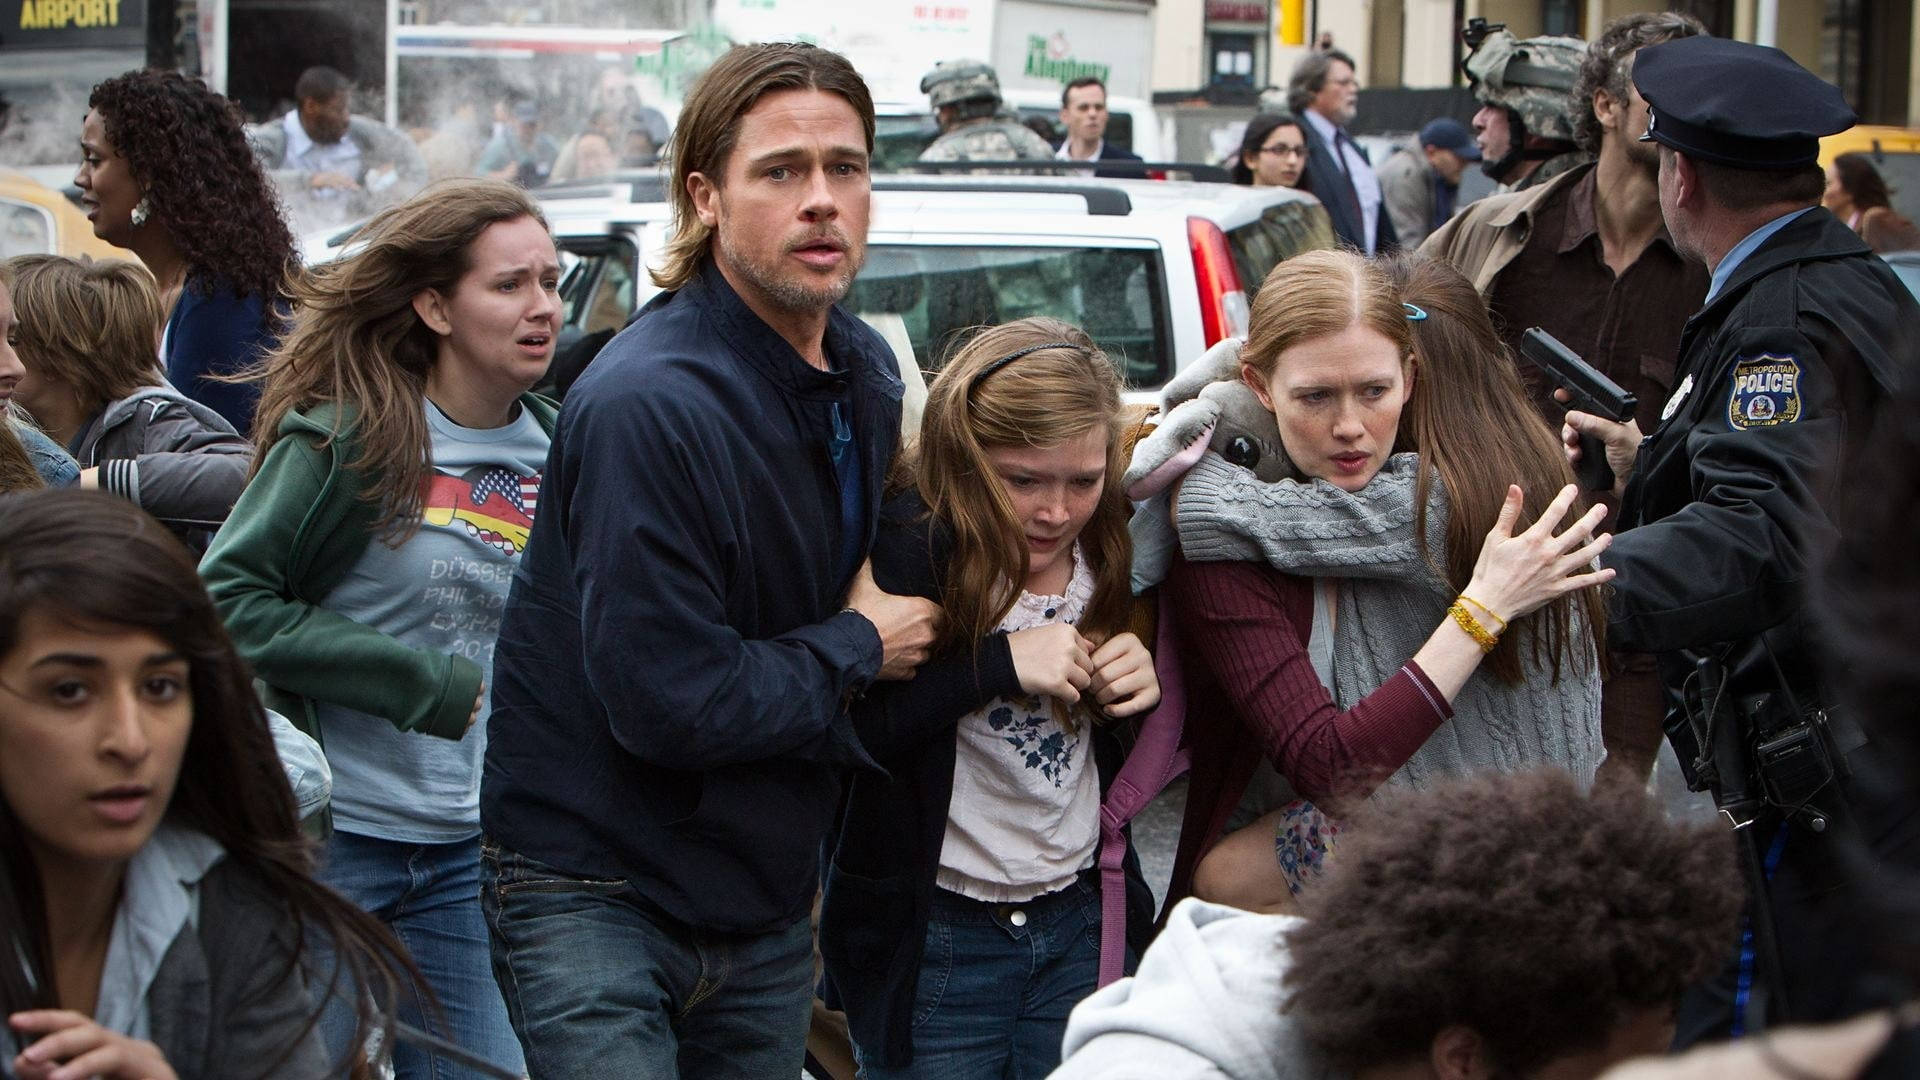 World War Z 1920X1080 Wallpaper and Background Image